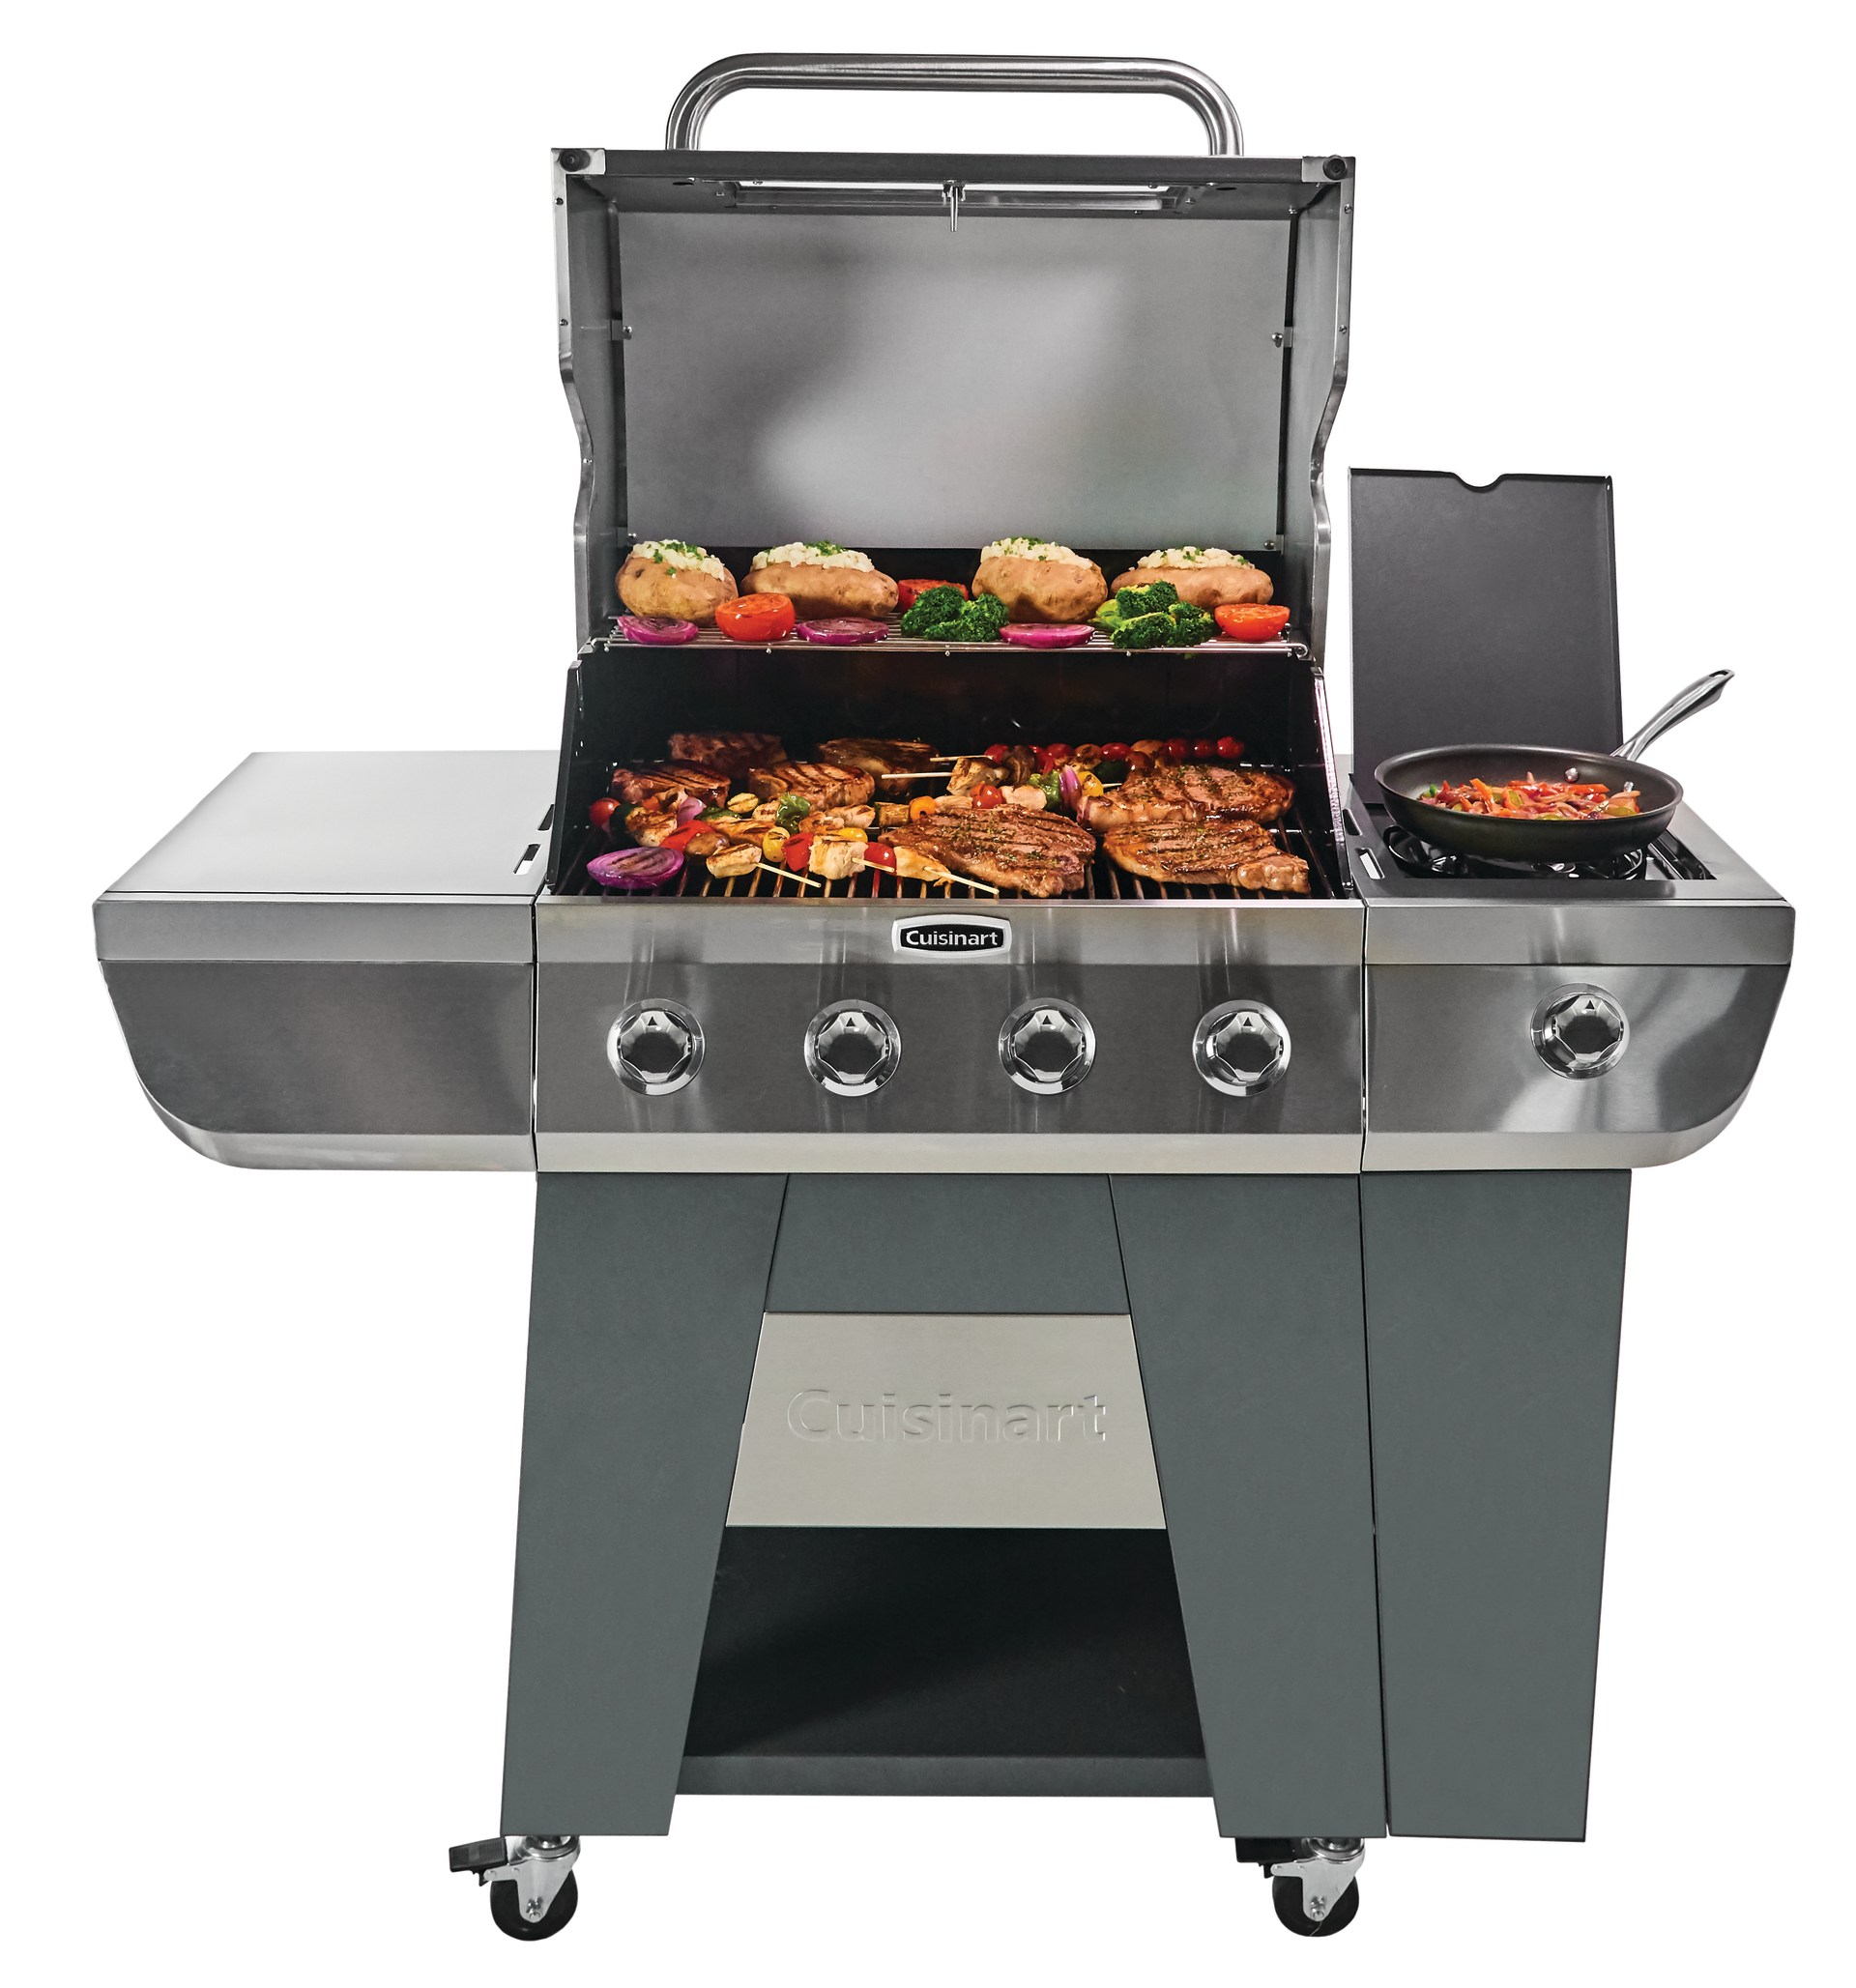 Sophia & William 4-Burner Gas BBQ Grill with Side Burner and  Porcelain-Enameled Cast Iron Grates 42,000BTU Outdoor Cooking Stainless  Steel Propane